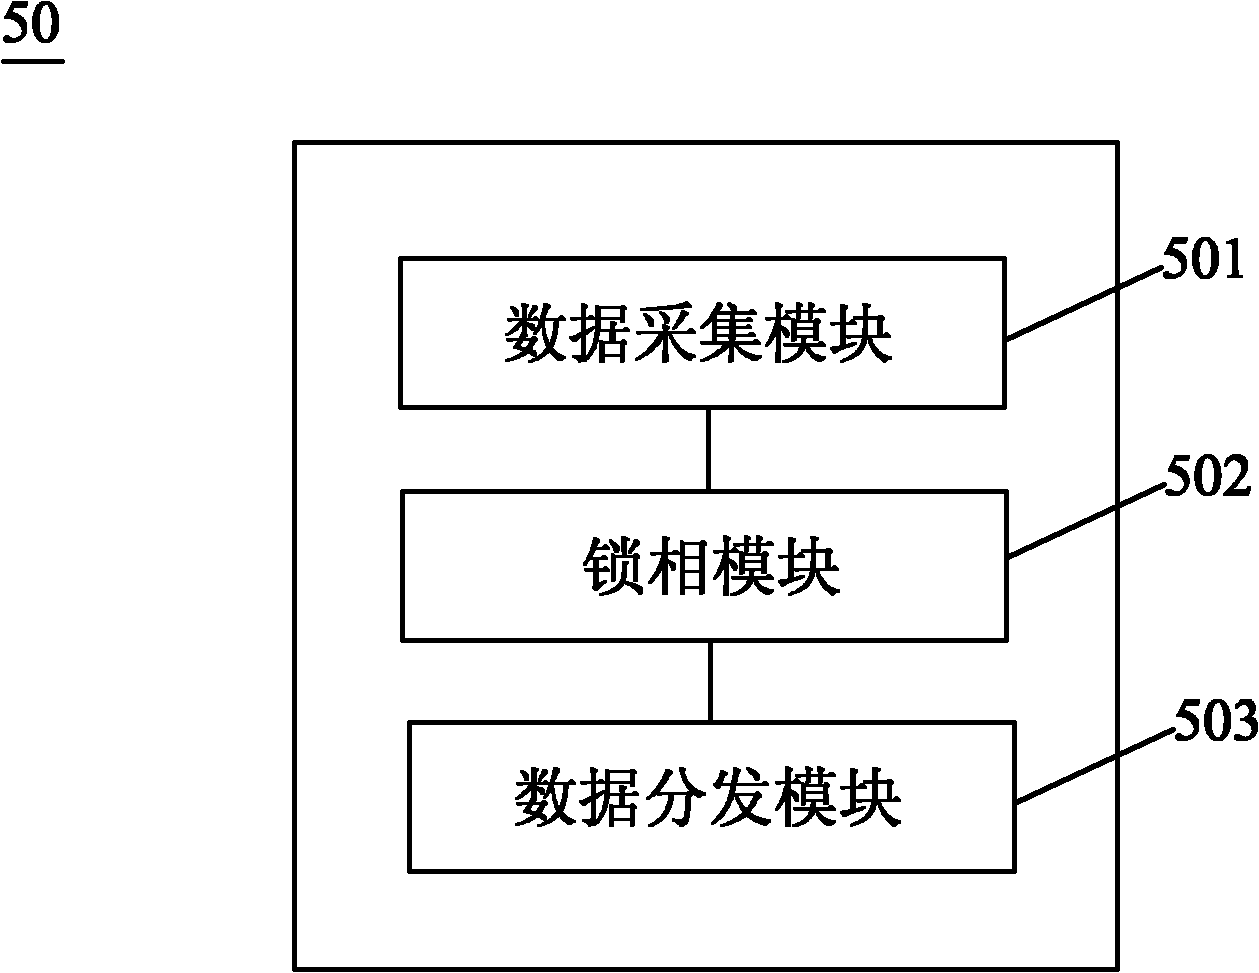 High-frequency and high-speed frequency testing system and method based on phase locking technique